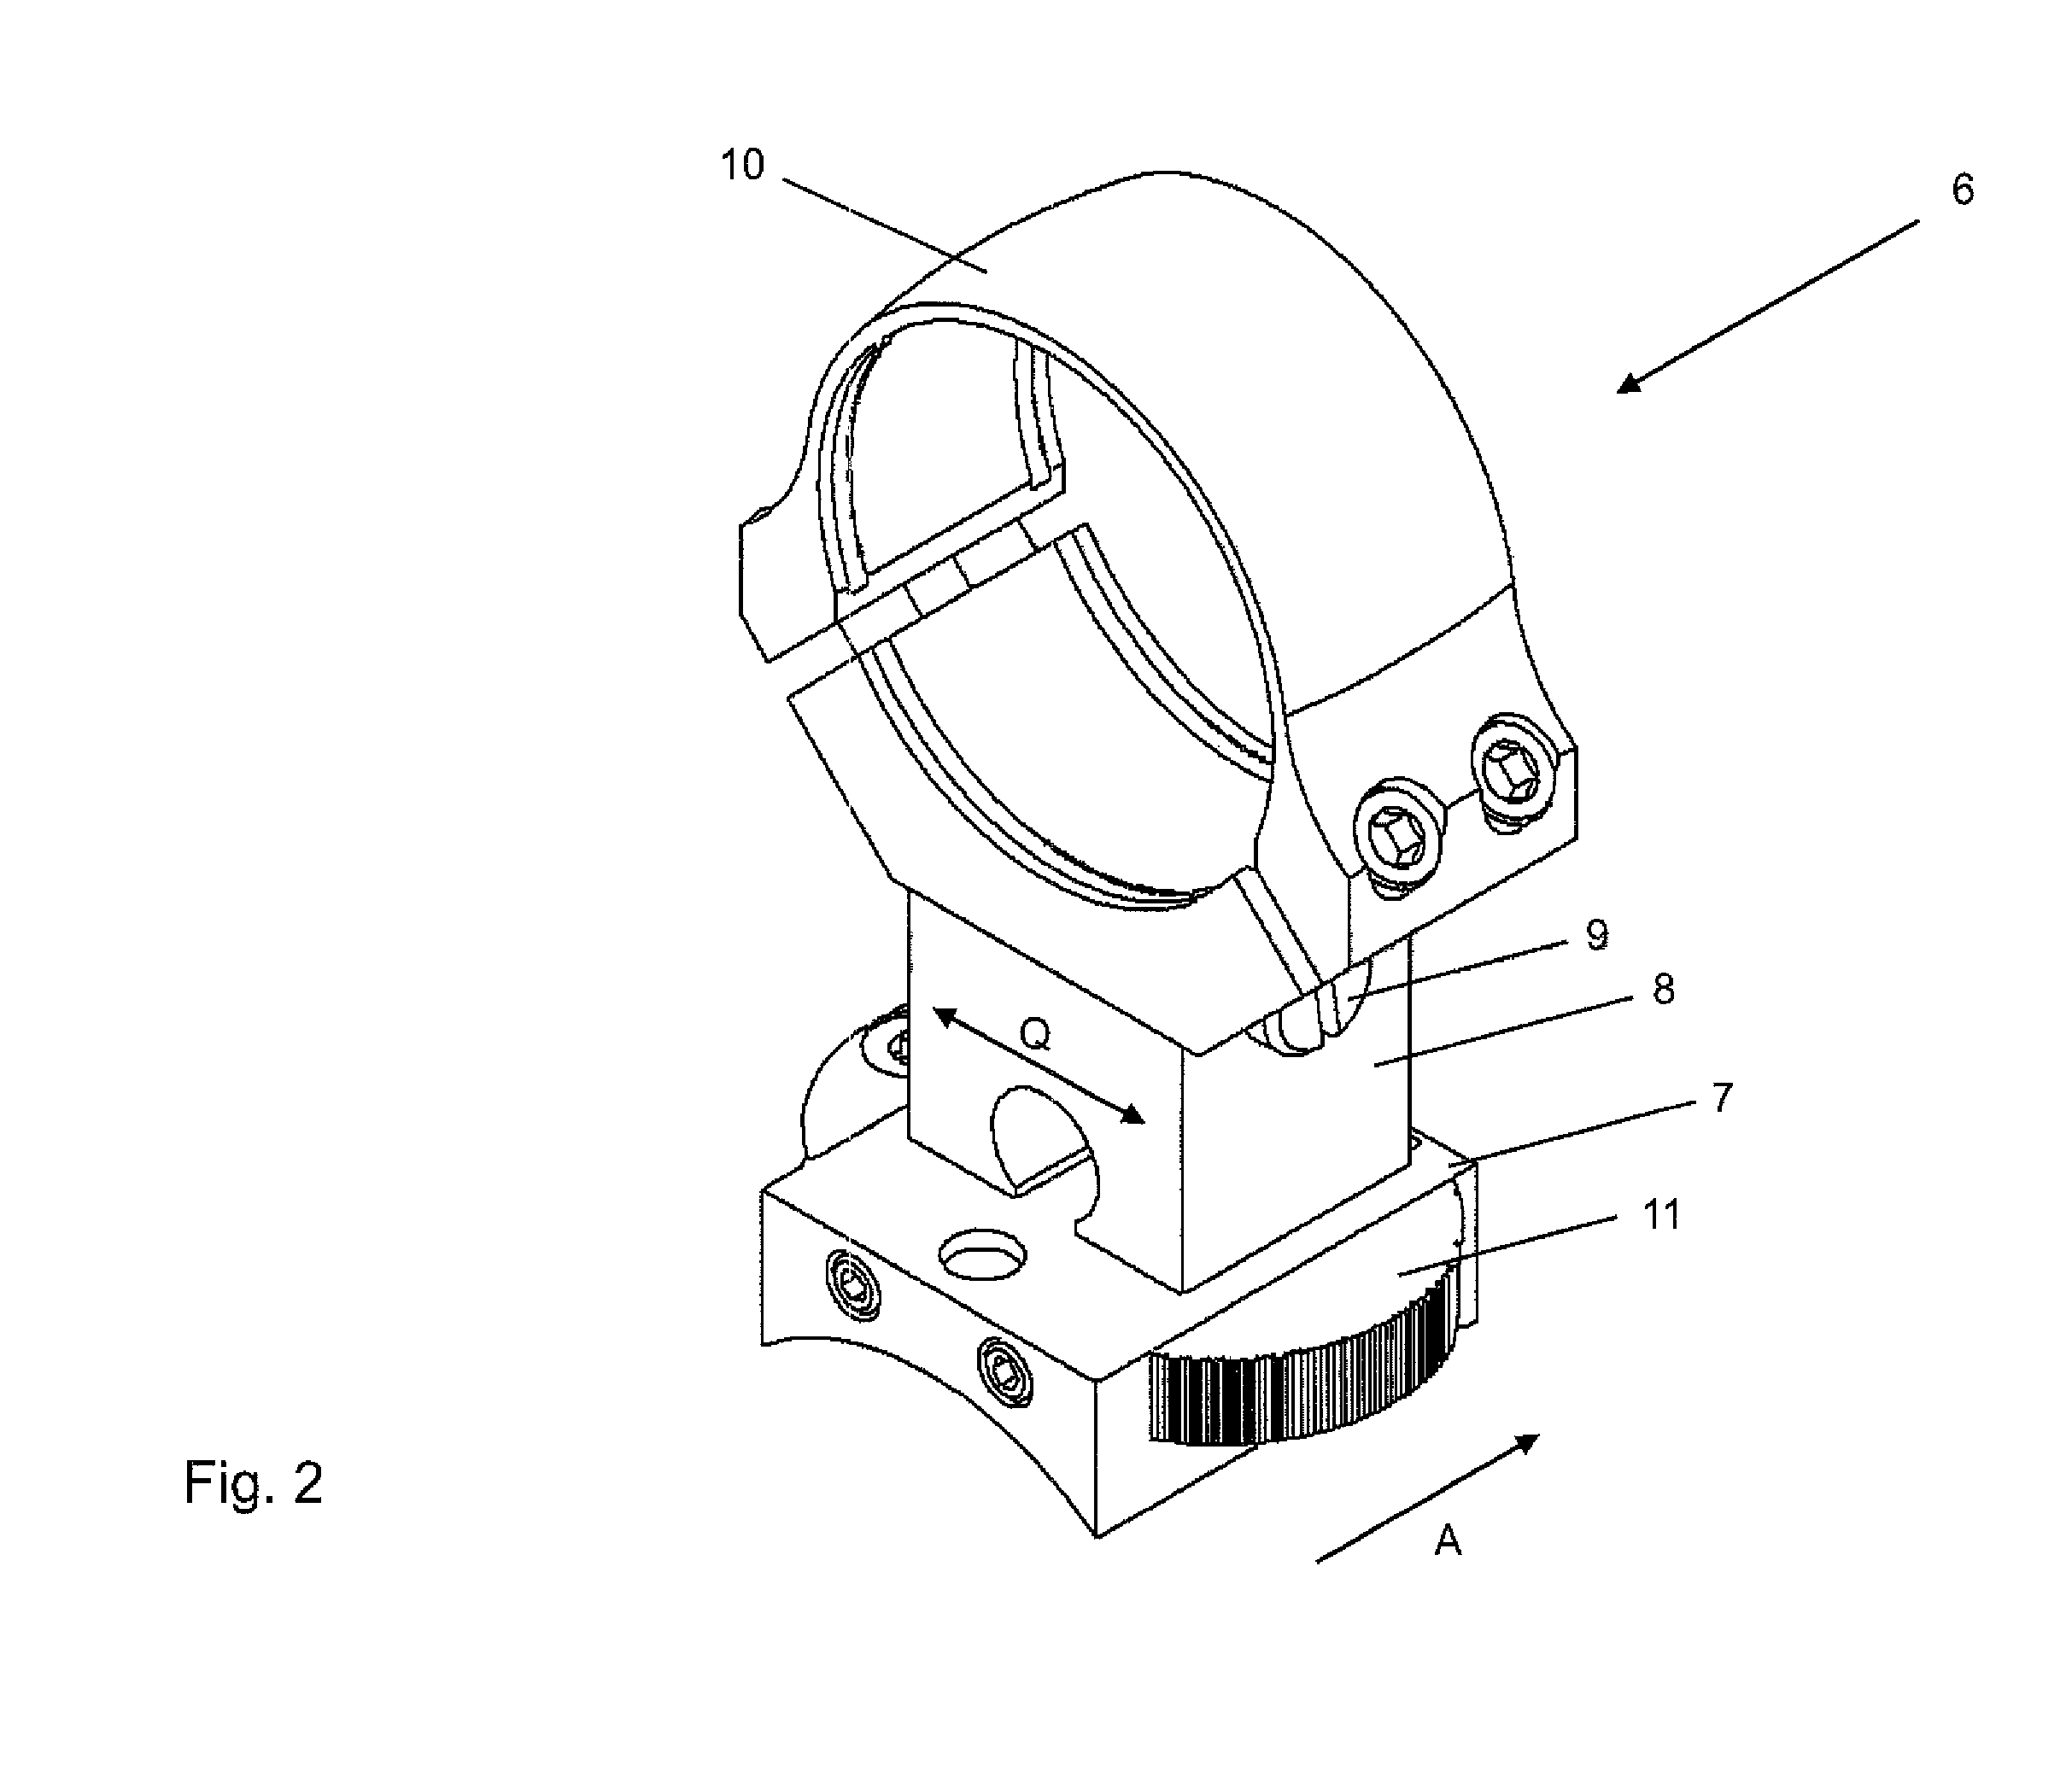 It is common for the top quality European mounts such as the Ernst Apel to use an over center split ring. This allows more force to be applied to the rifle-scope tube and if tightened too much will cause the rifle-scope tube to be deformed. (US Patent picture).